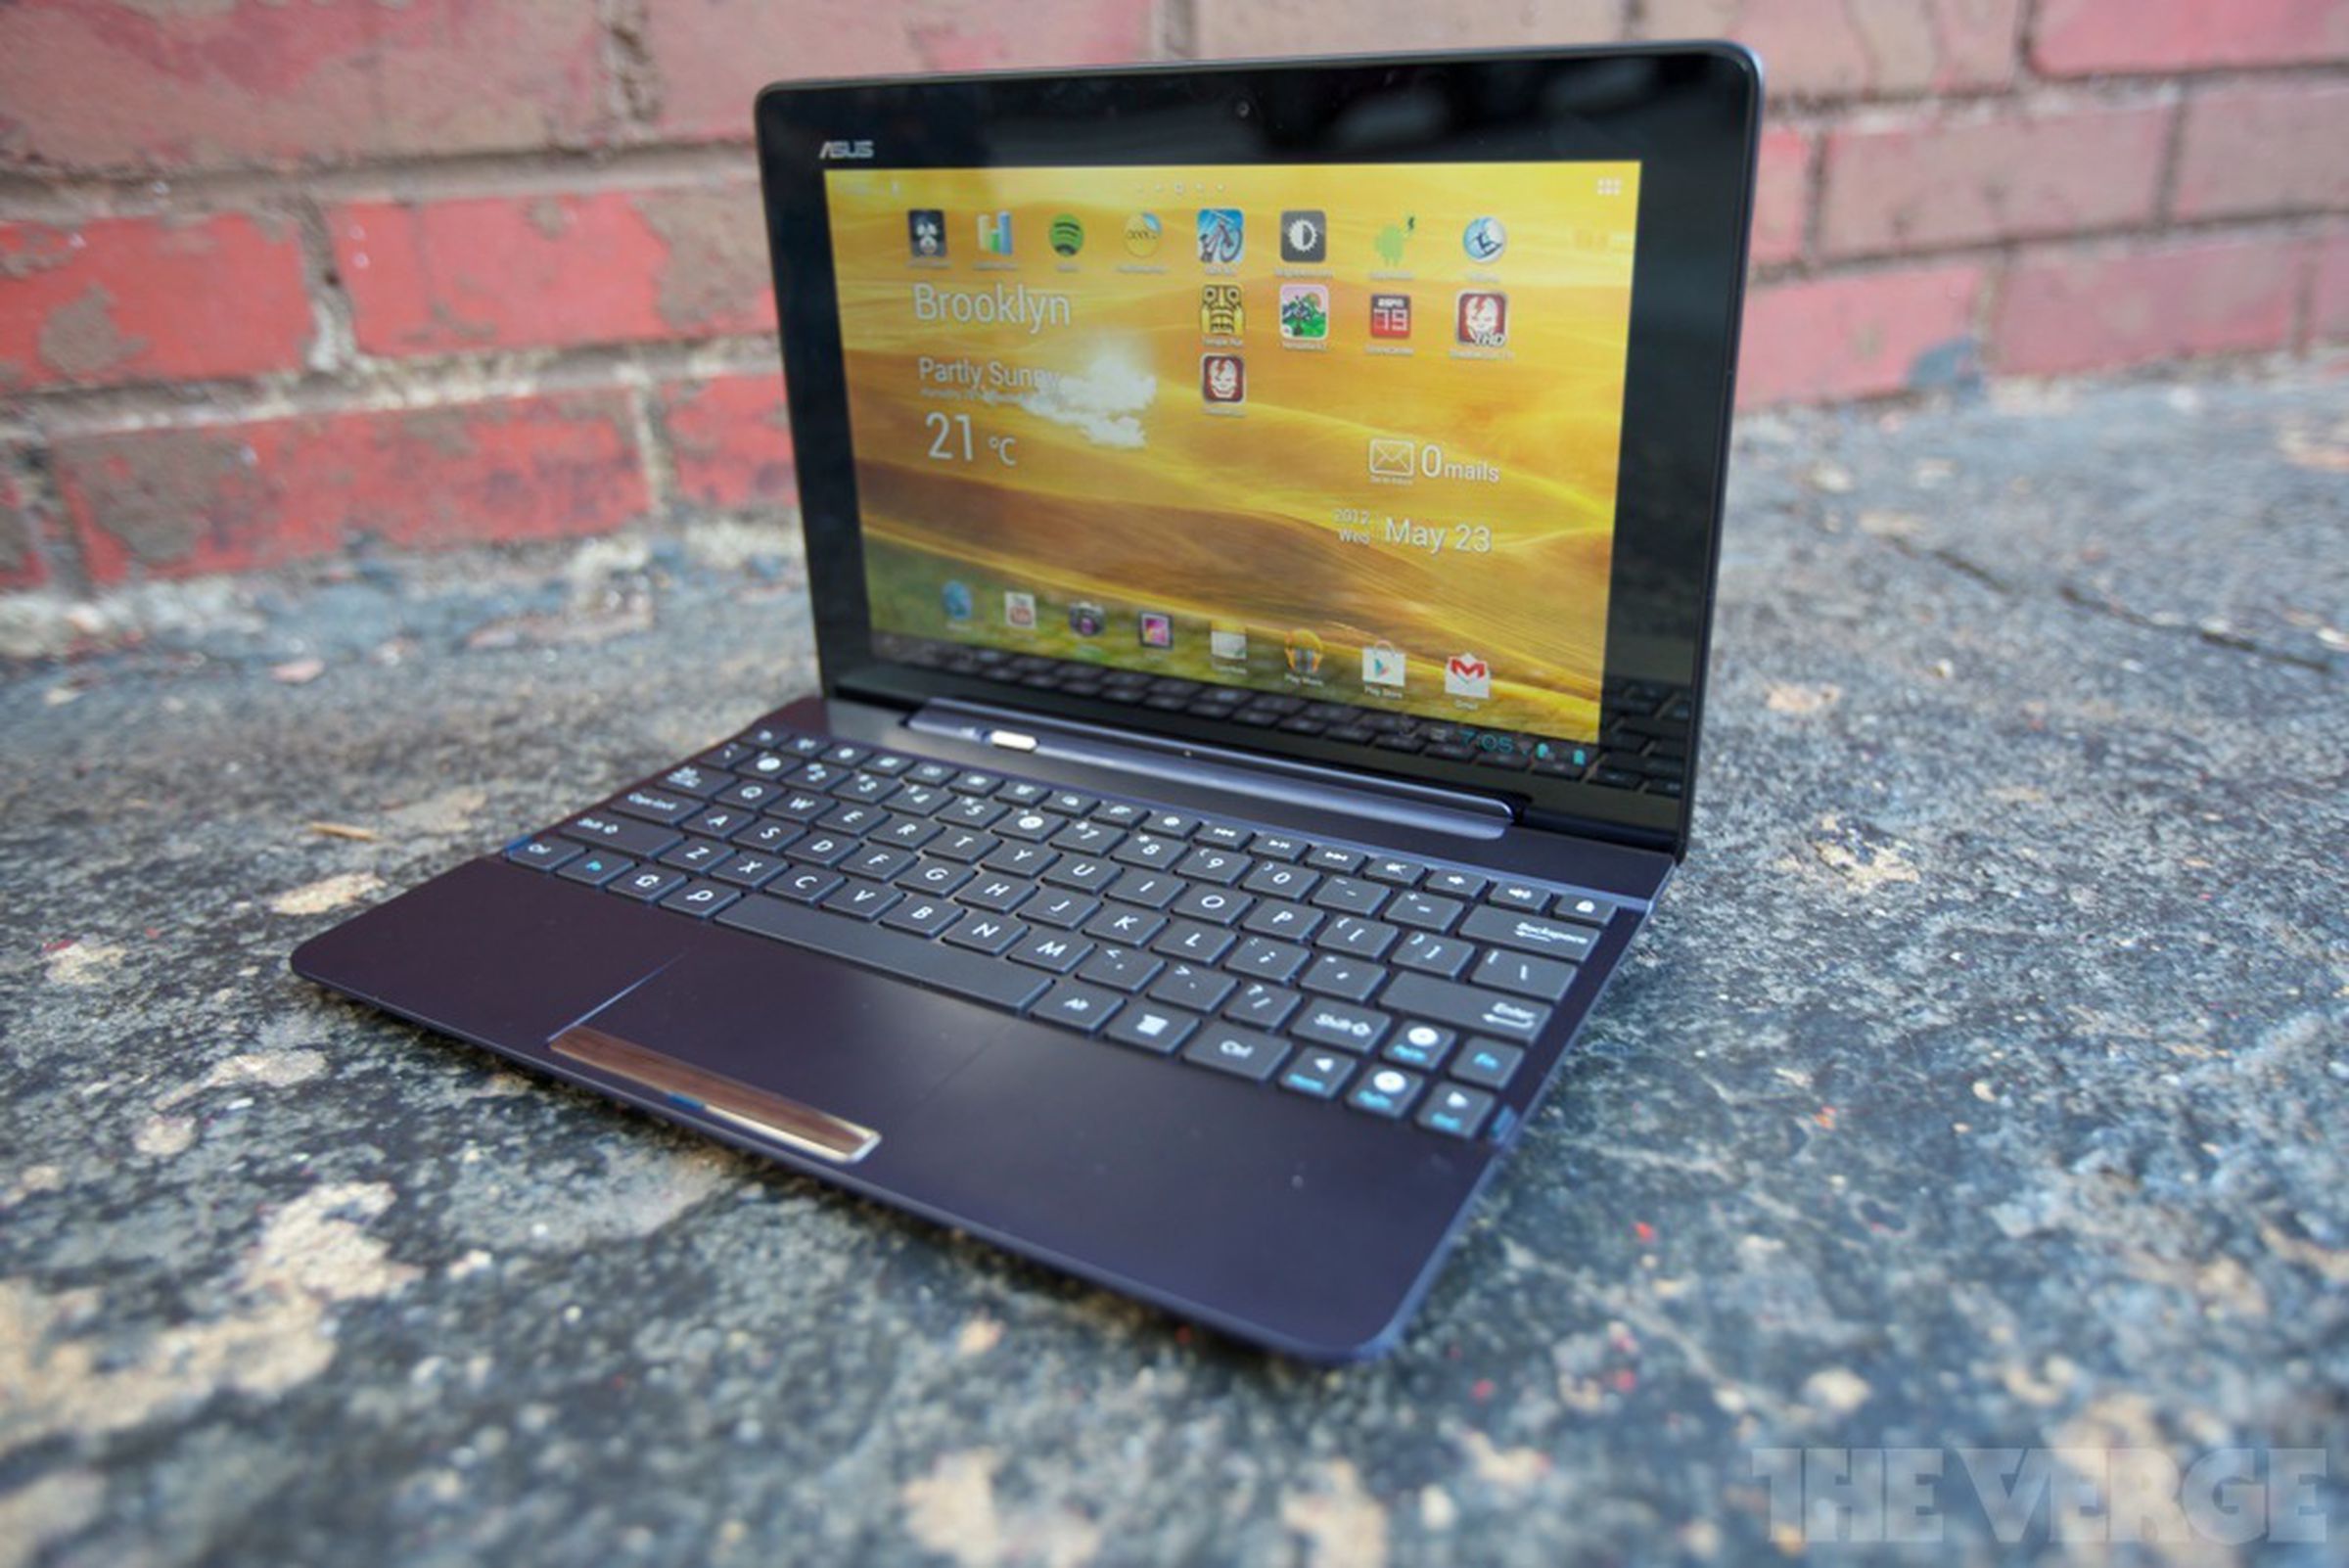 Asus Transformer Pad TF300T review pictures